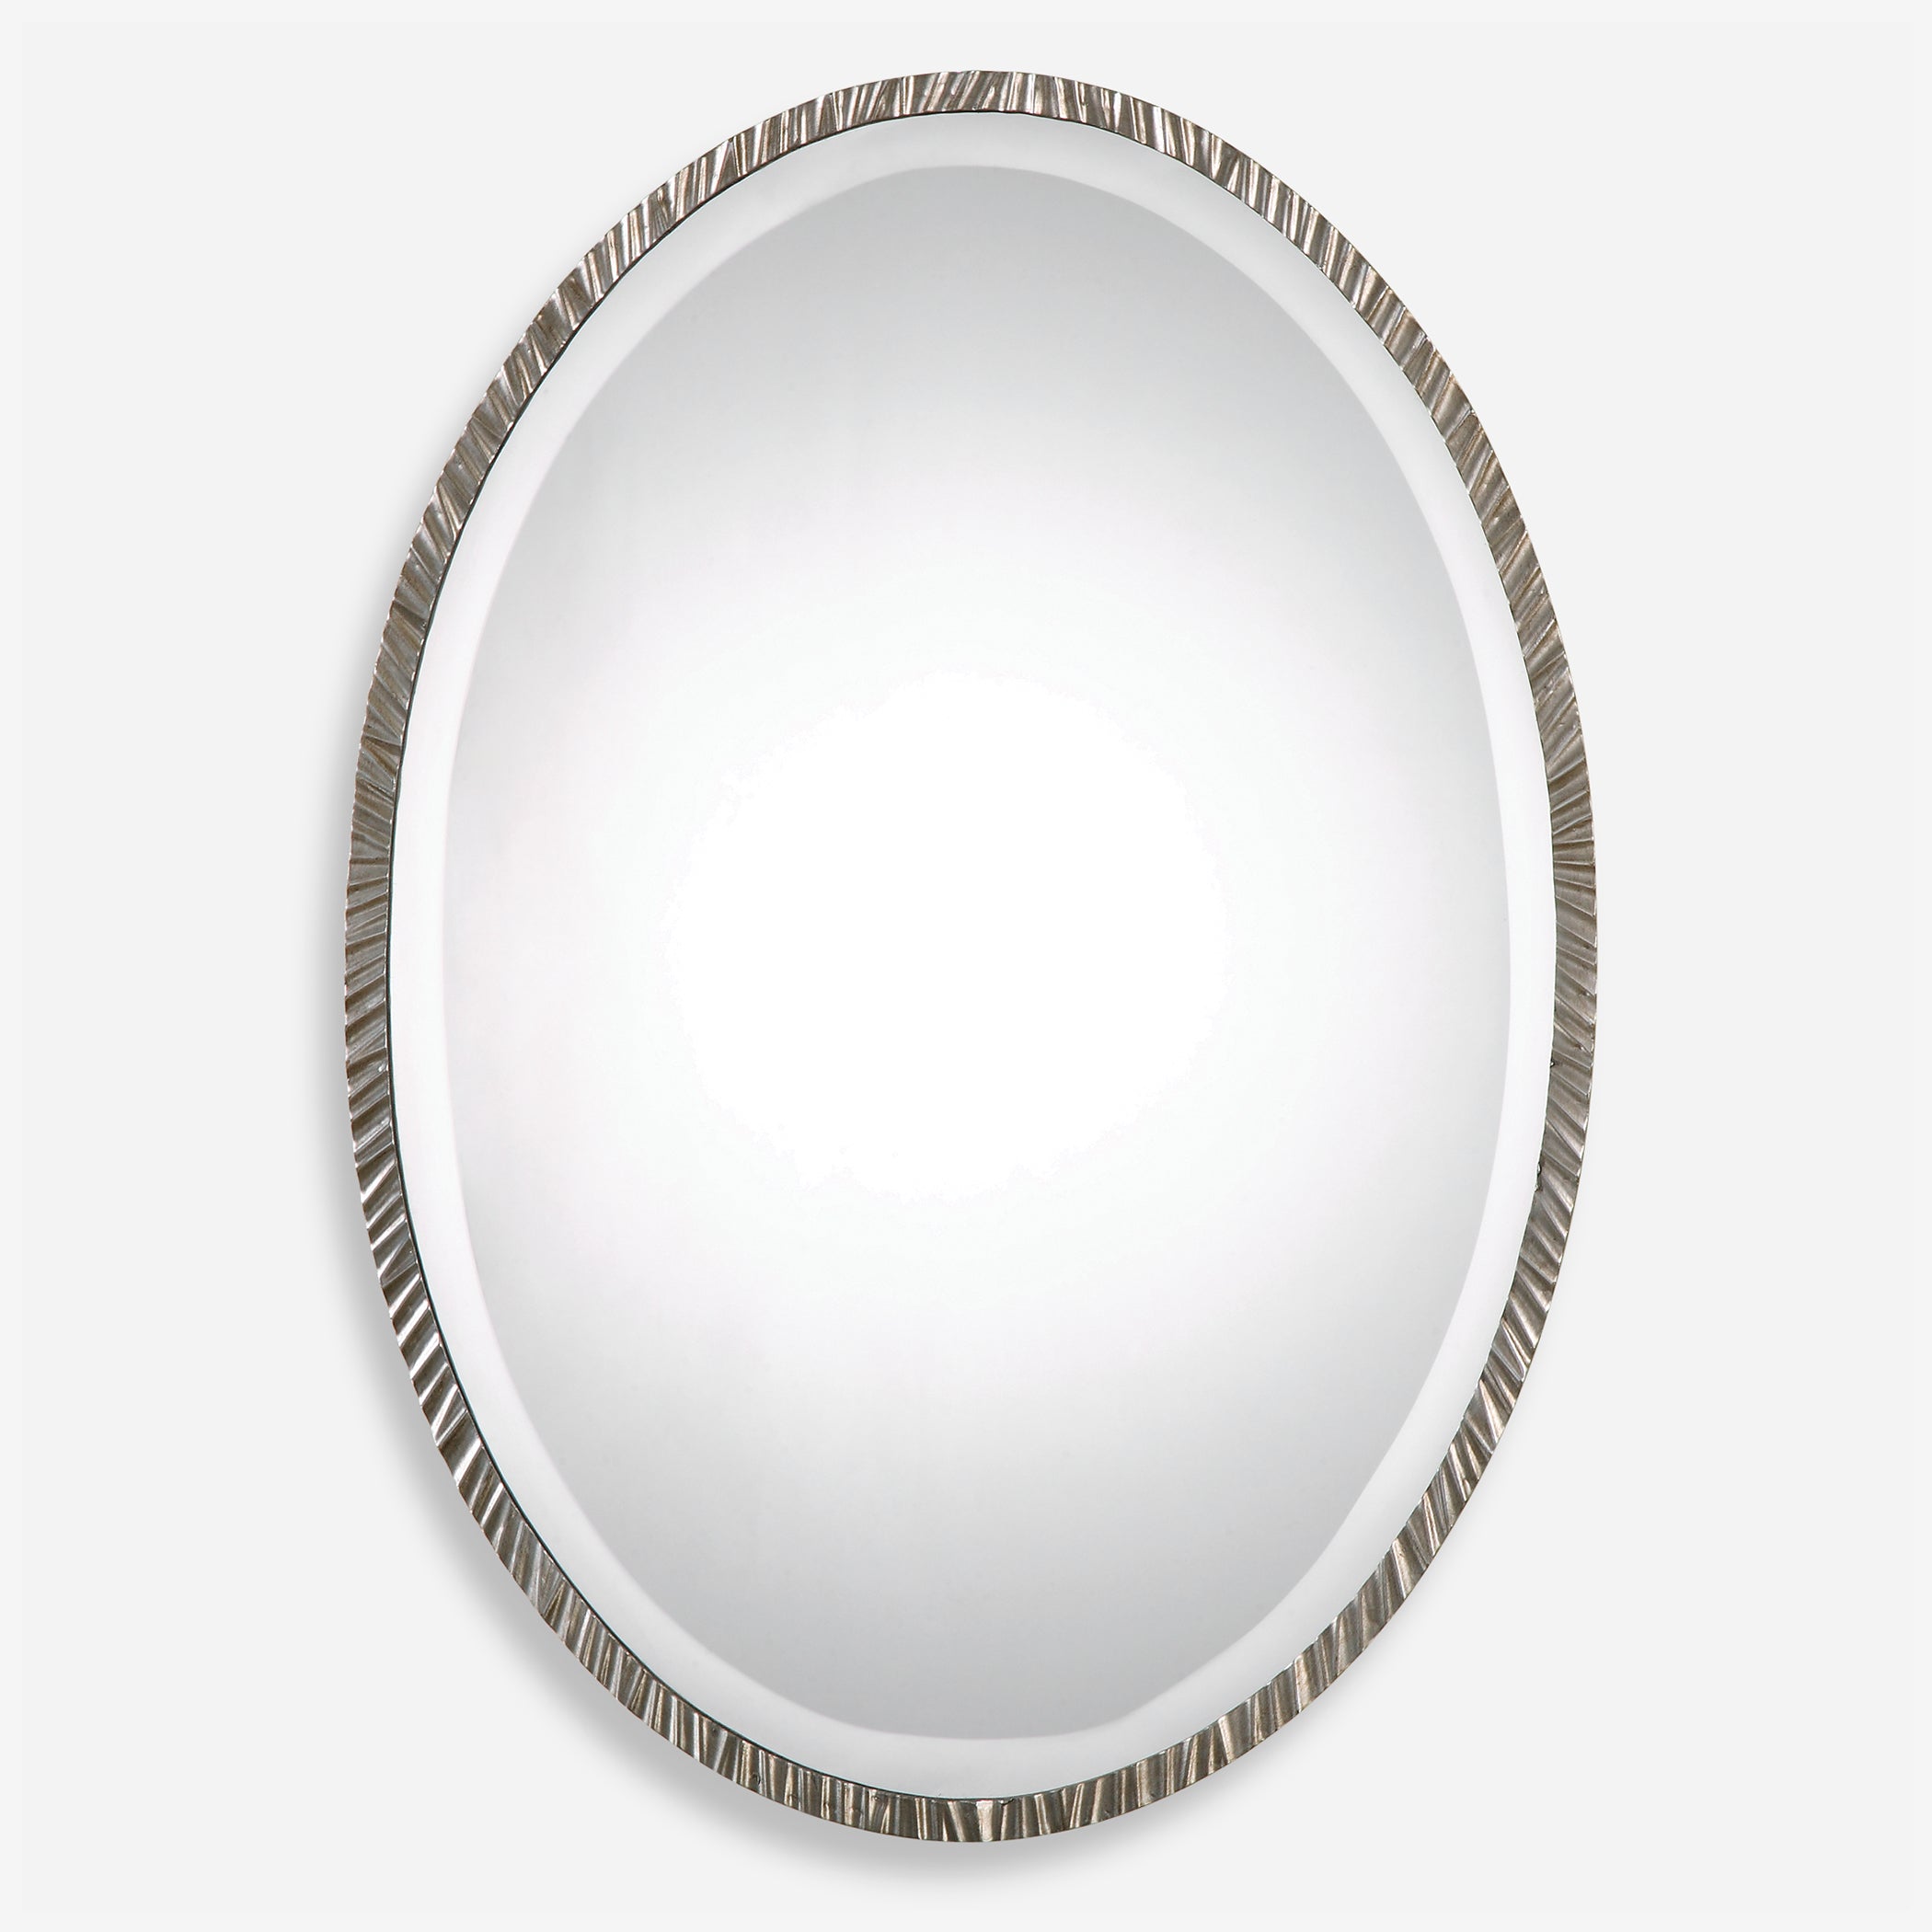 Uttermost Annadel Oval Oval Wall Mirrors Oval Wall Mirrors Uttermost   